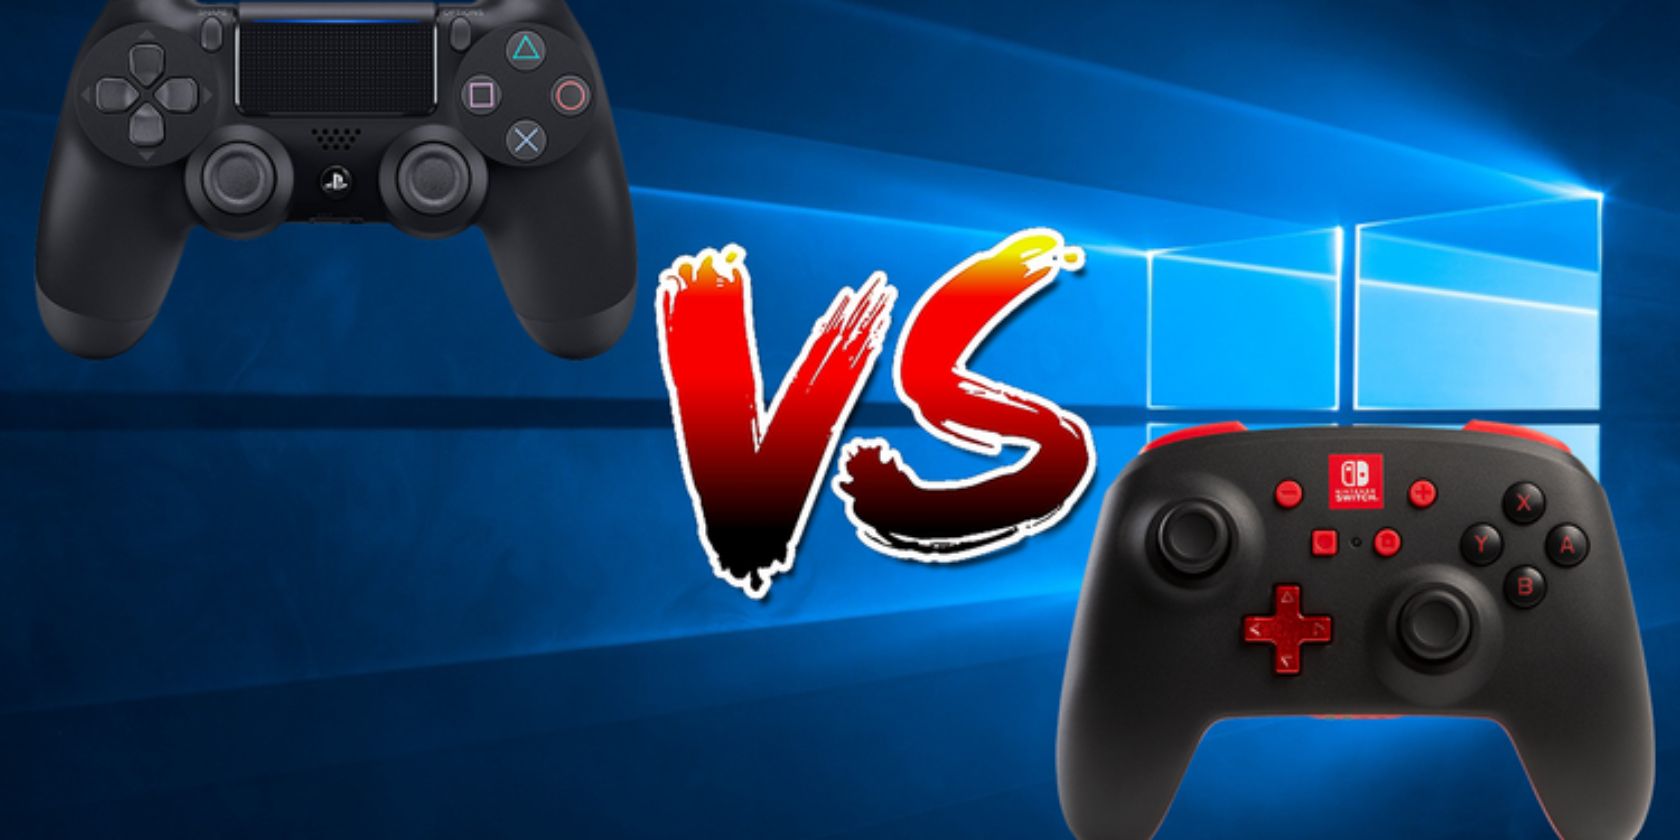 Dualshock 4 Vs Switch Pro Controller Which Is Best For Pc Gaming